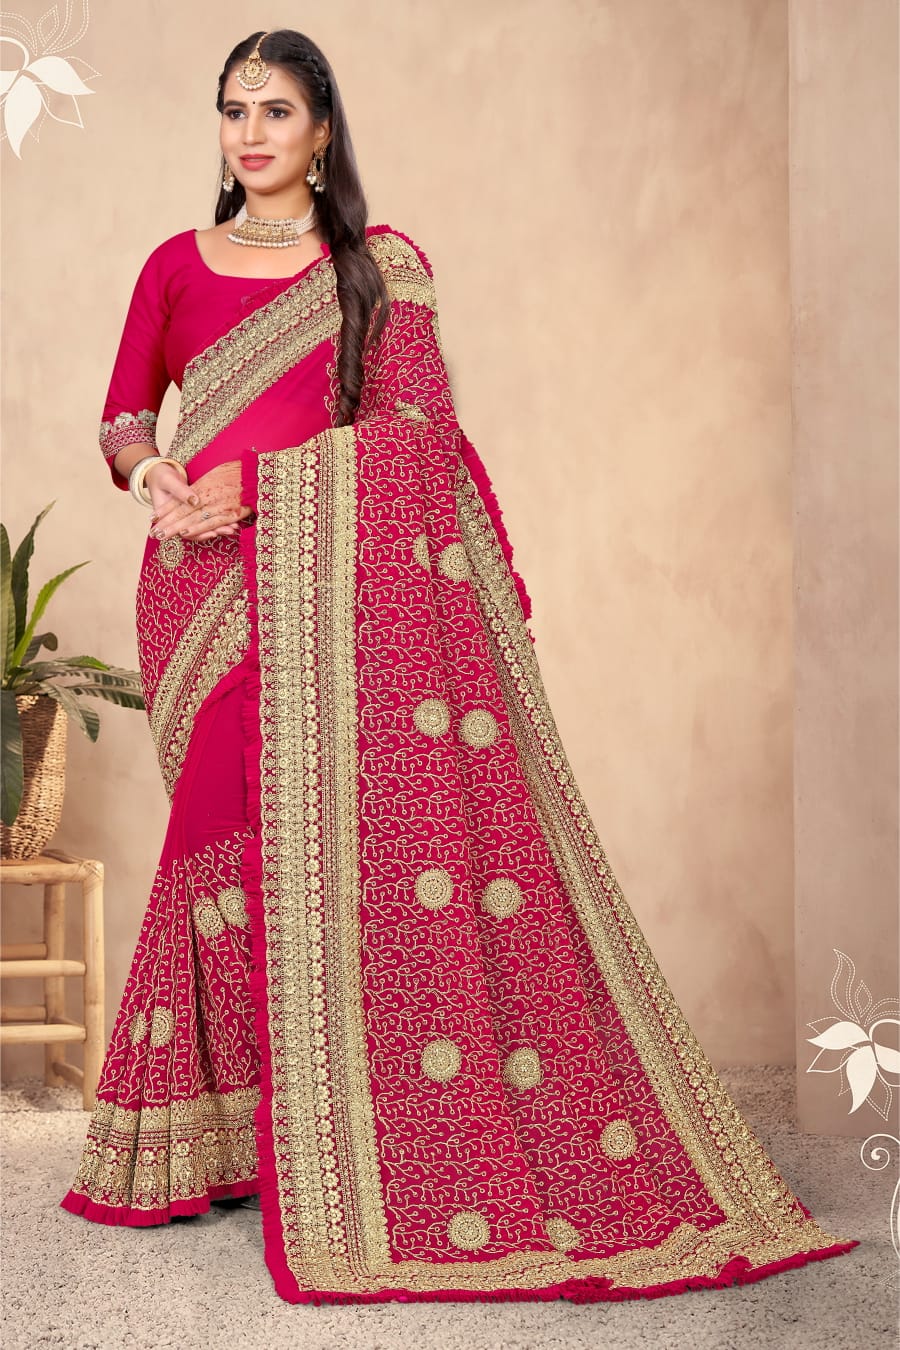 FULL JARI WORK ON PURE GEORGETTE SAREE IN PINK FOR WEDDING 